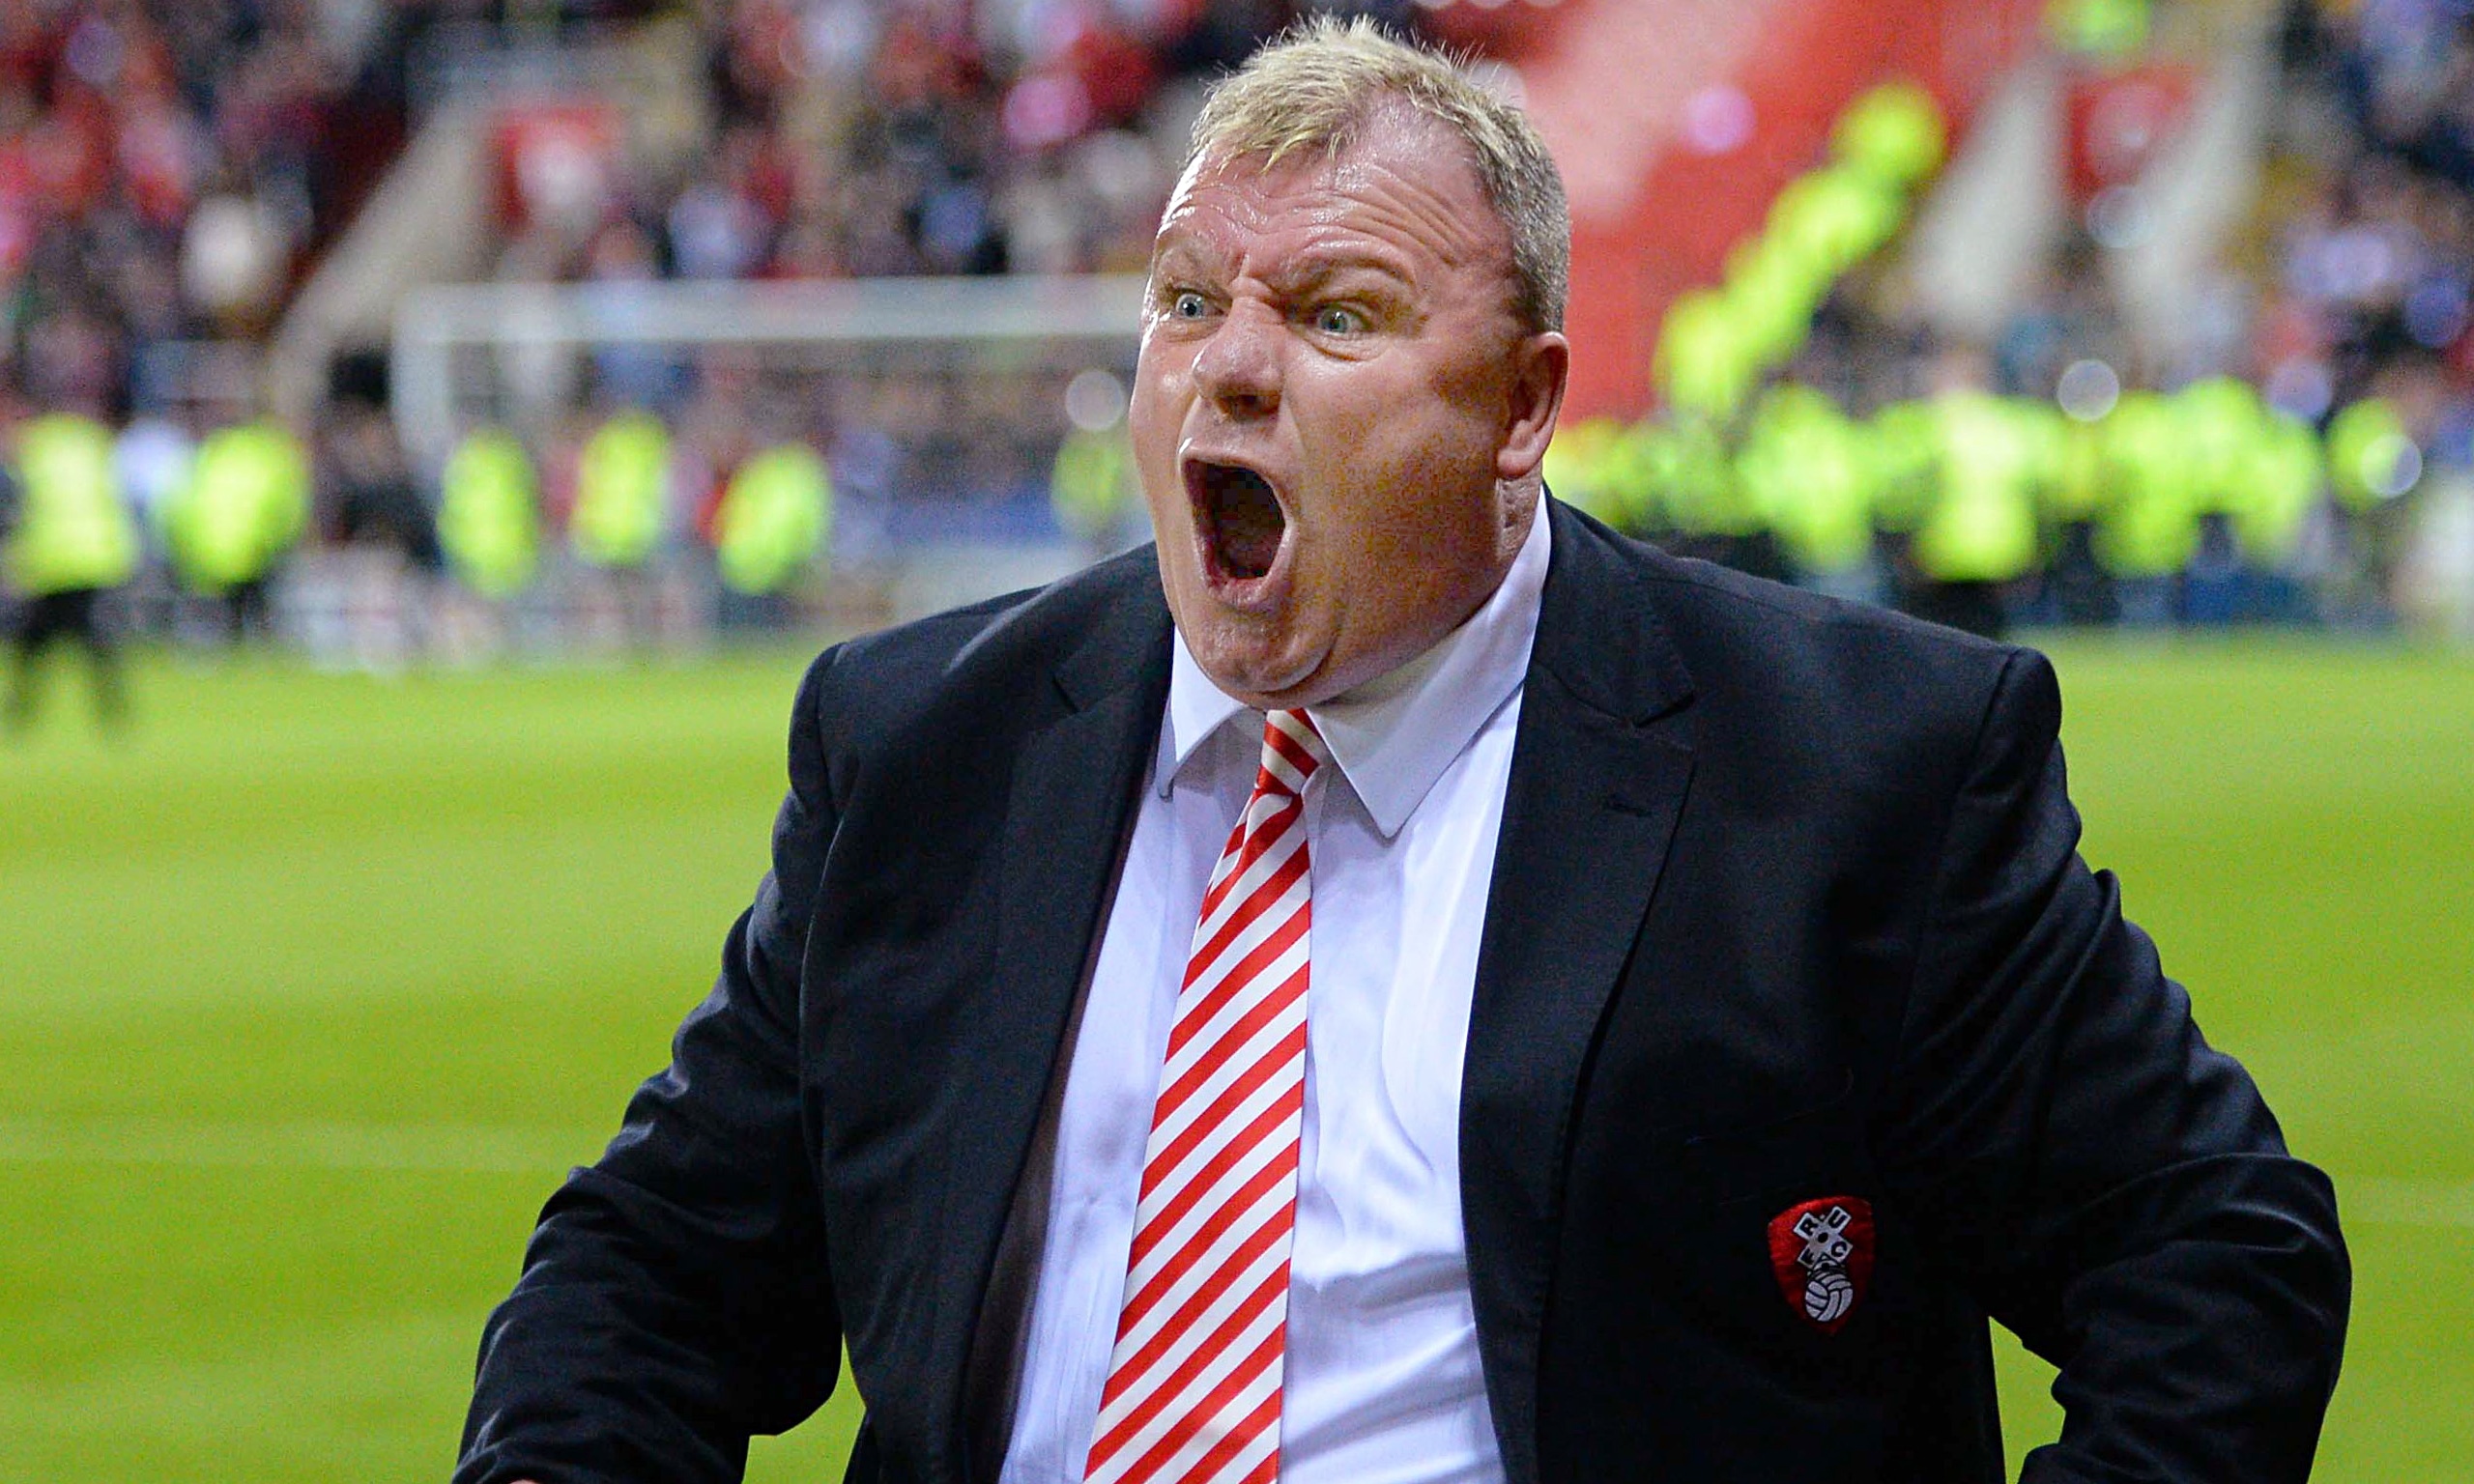 Rotherham manager Steve Evans appeals for fans to leave the pitch after they staged a premature pitc